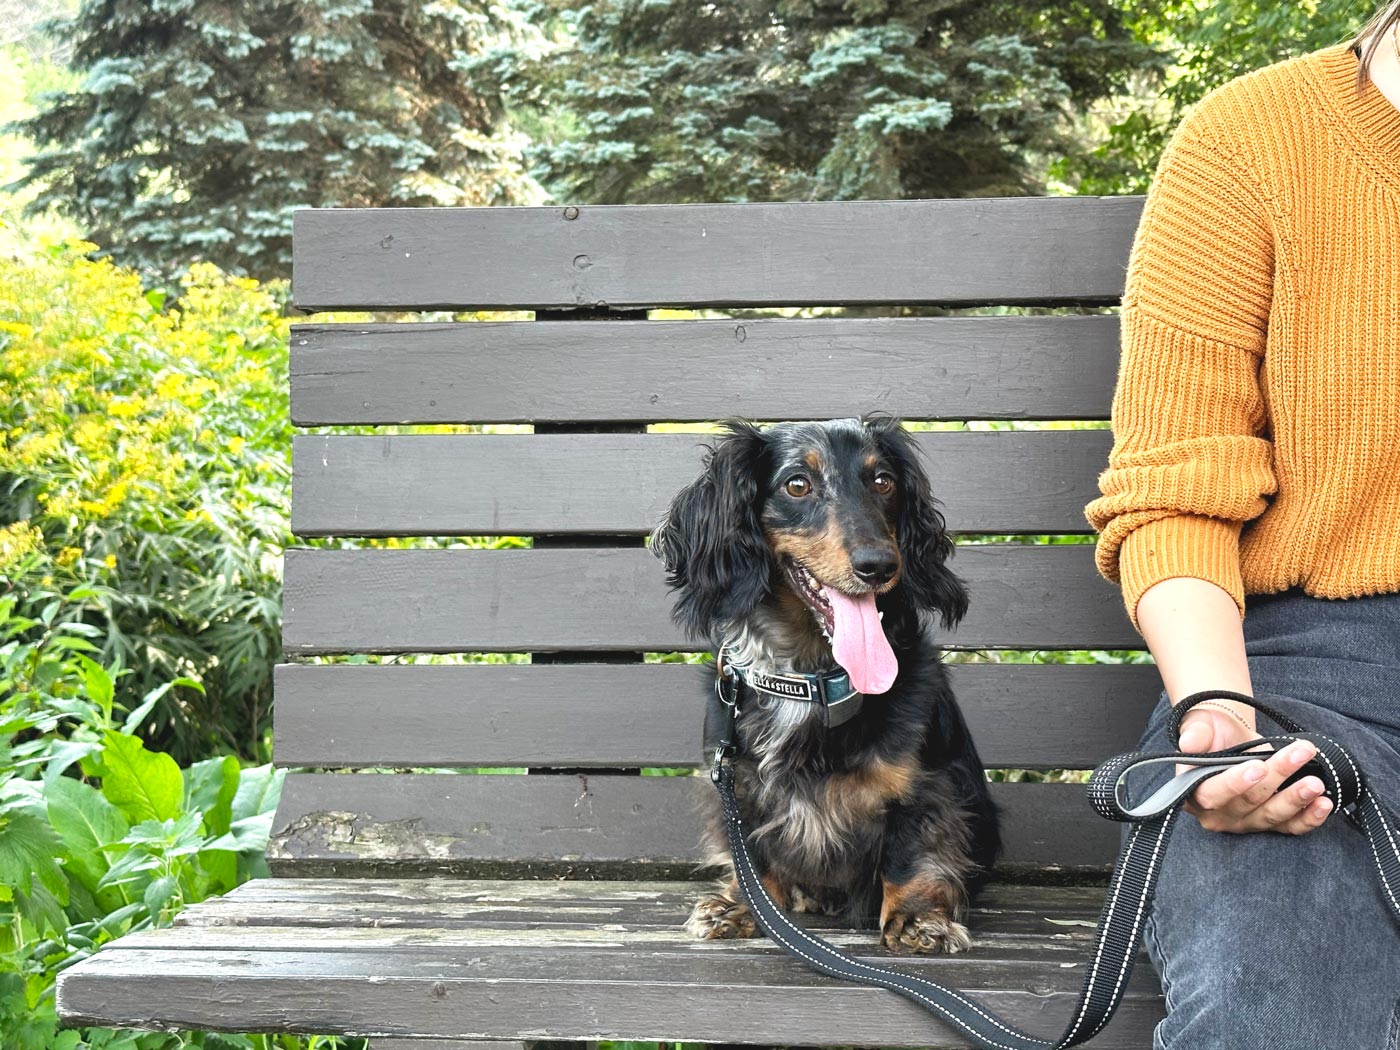 A dachshund sits next to its owner on a bench at the garden